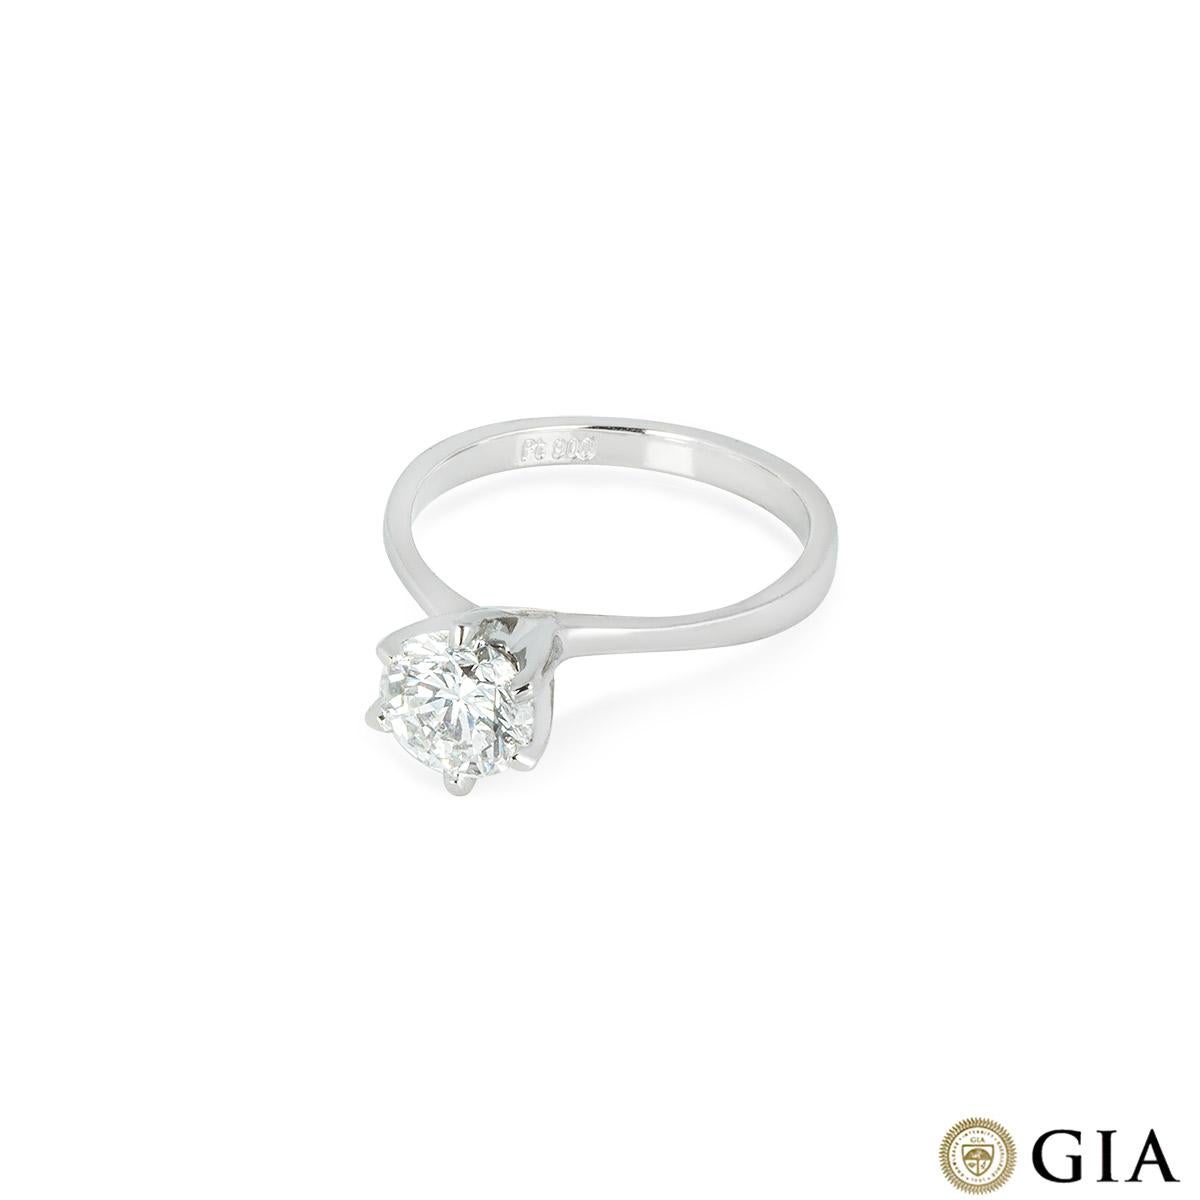 GIA Certified Platinum Round Brilliant Cut Diamond Ring 1.08ct I/SI2 In Excellent Condition For Sale In London, GB